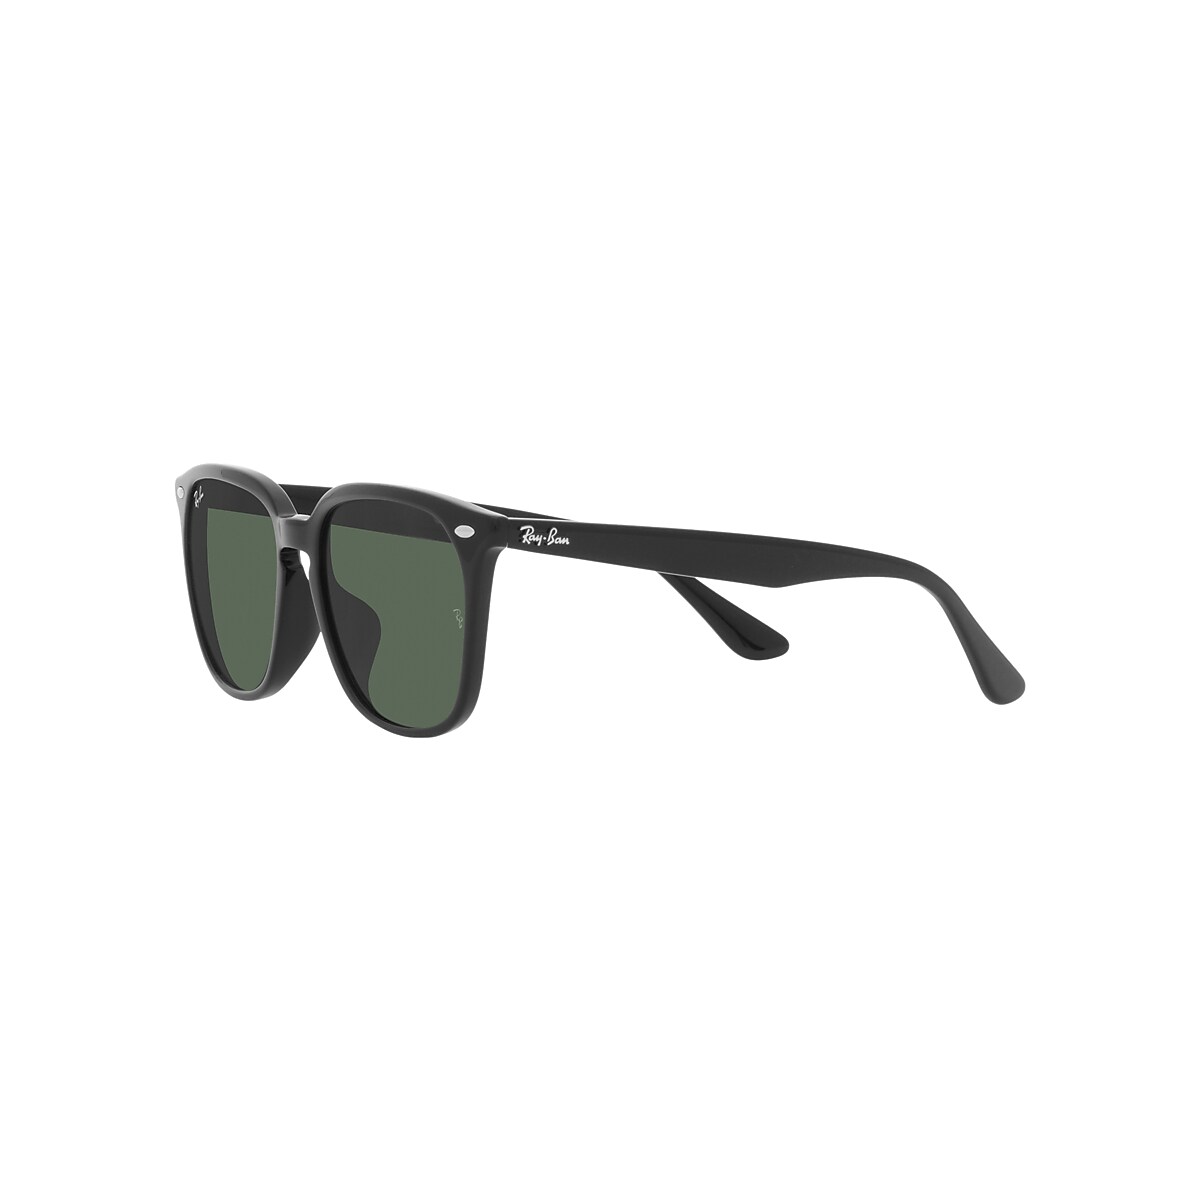 RB4362 Sunglasses in Black and Green - RB4362F | Ray-Ban® US